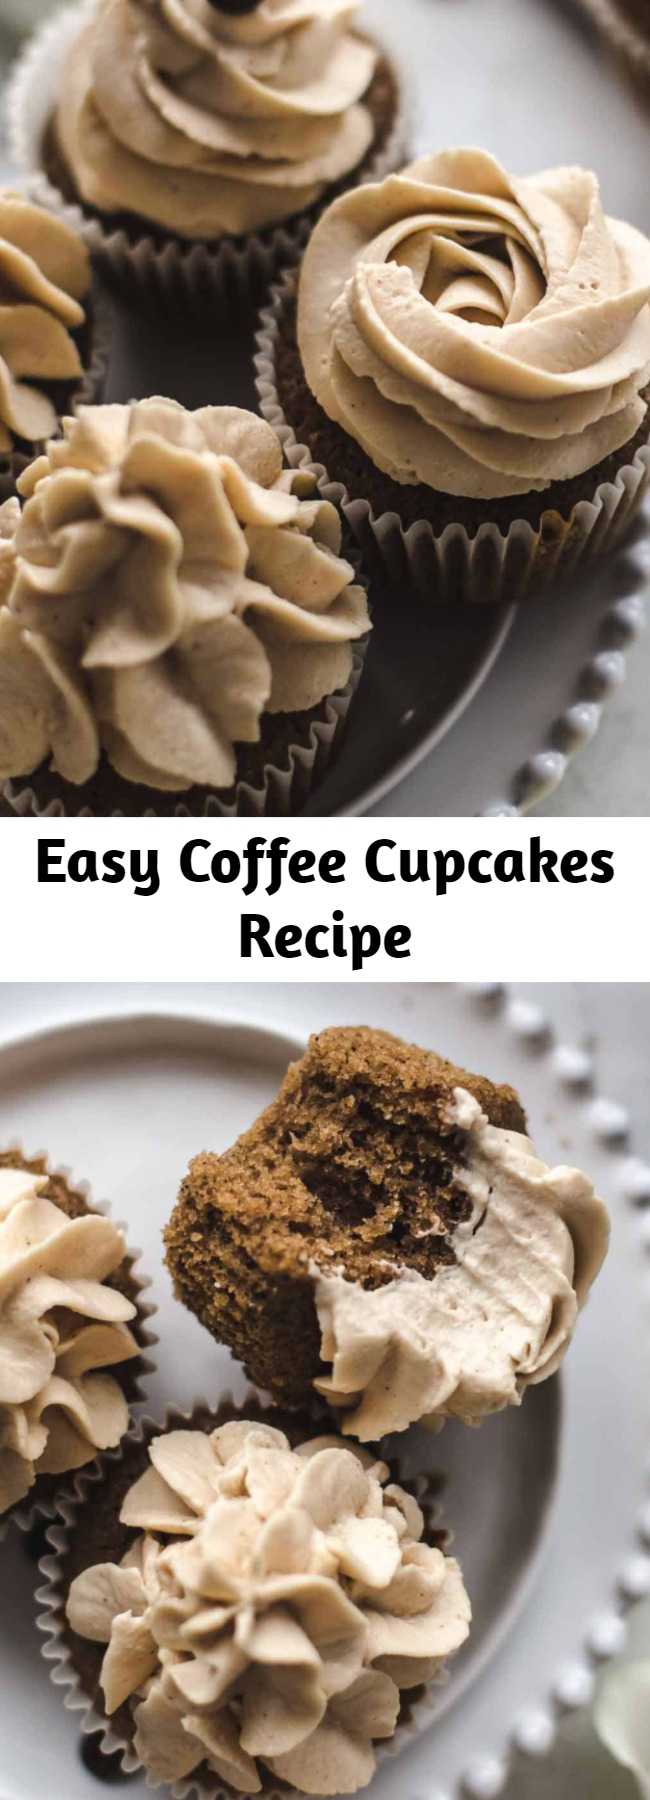 Easy Coffee Cupcakes Recipe - Super soft and moist Coffee Cupcakes topped with ultra creamy Coffee Mascarpone Frosting. Easy to make and a dream for coffee lovers. #coffee #cupcakes #frosting #baking #sweet #dessert